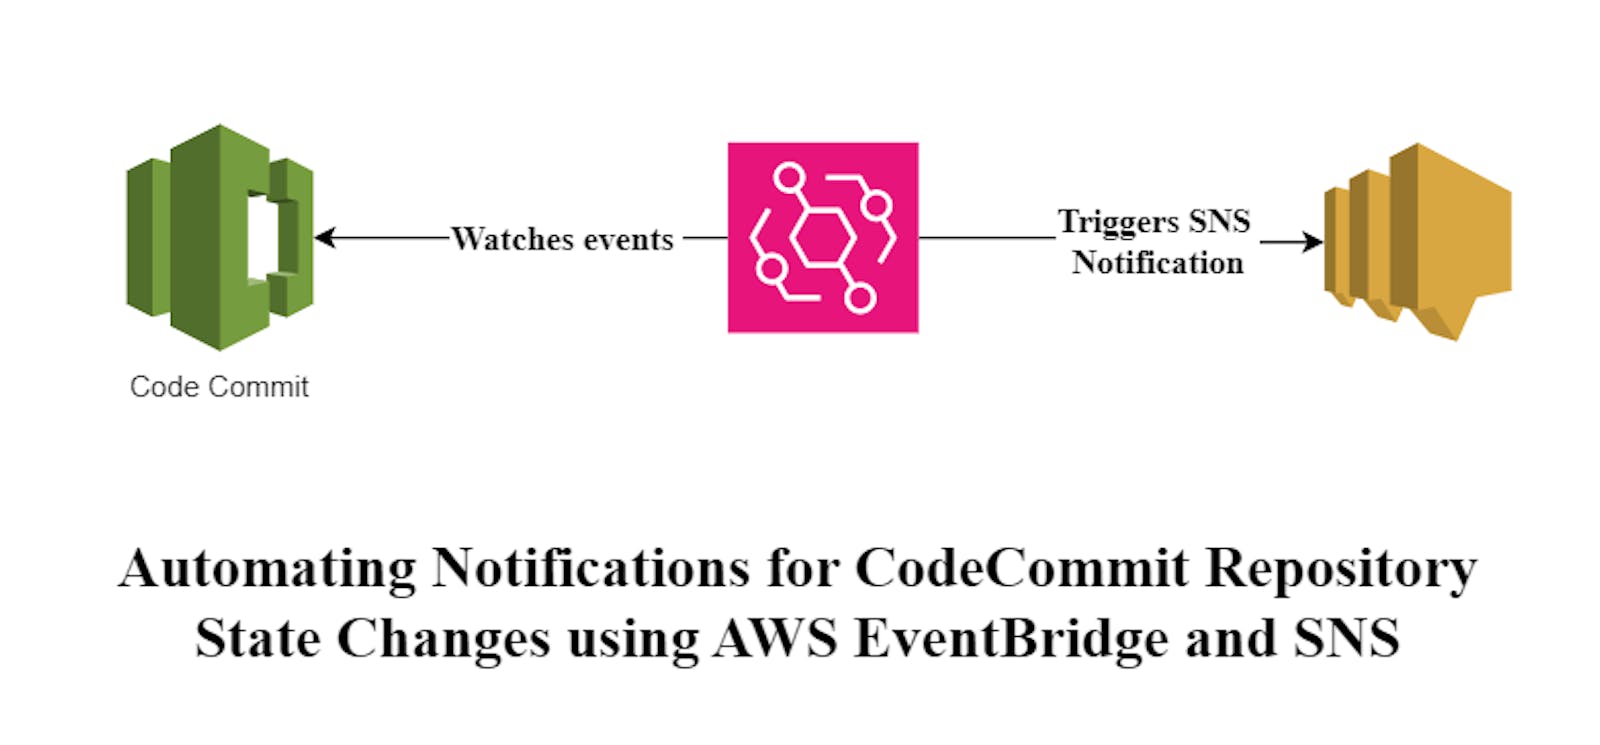 Automating Notifications for CodeCommit Repository State Changes using AWS EventBridge and SNS